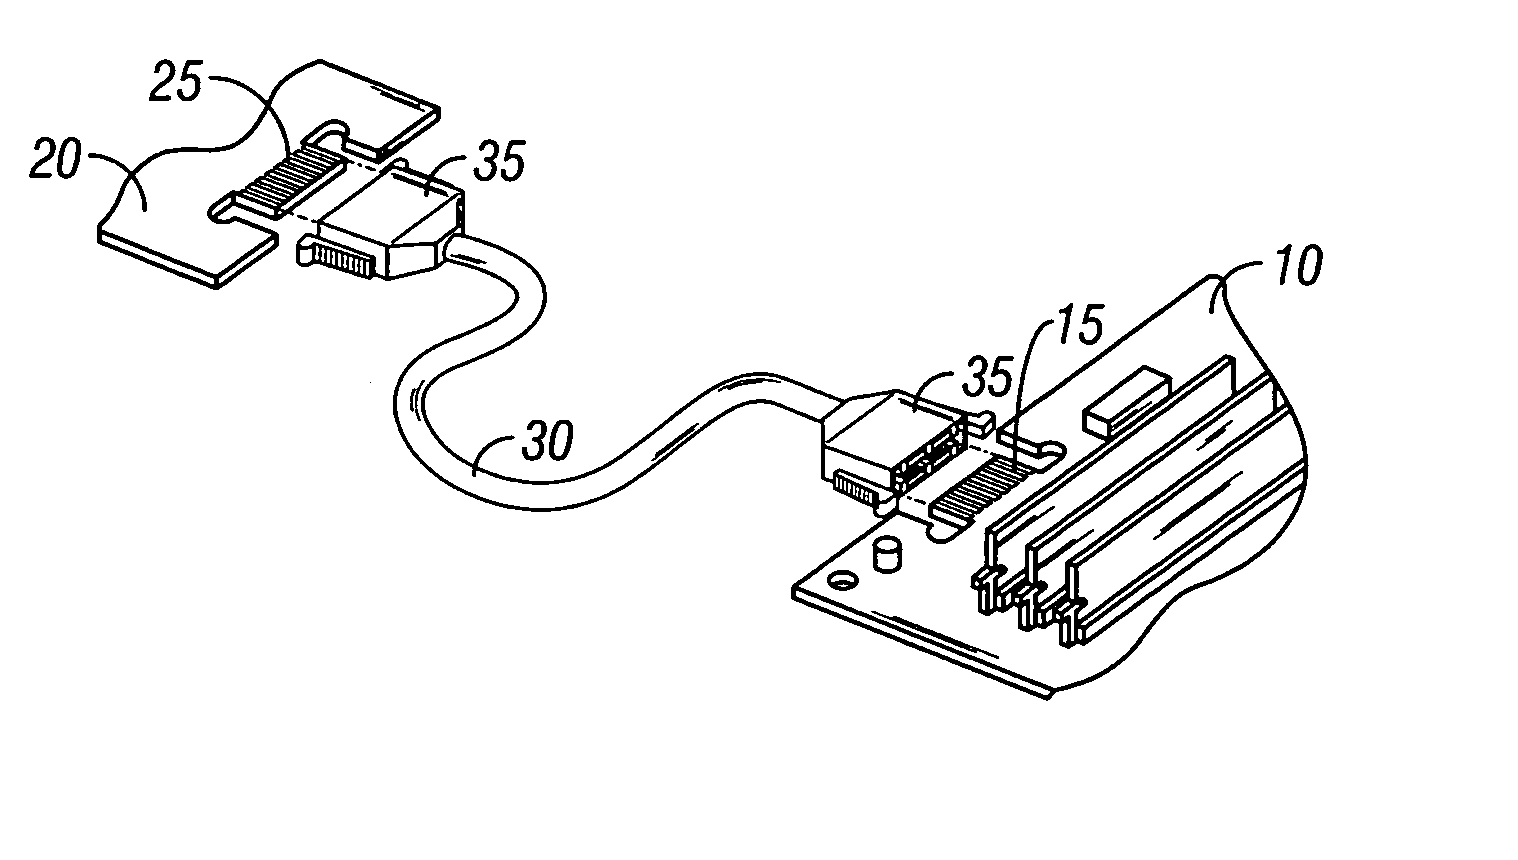 High speed shielded internal cable/connector